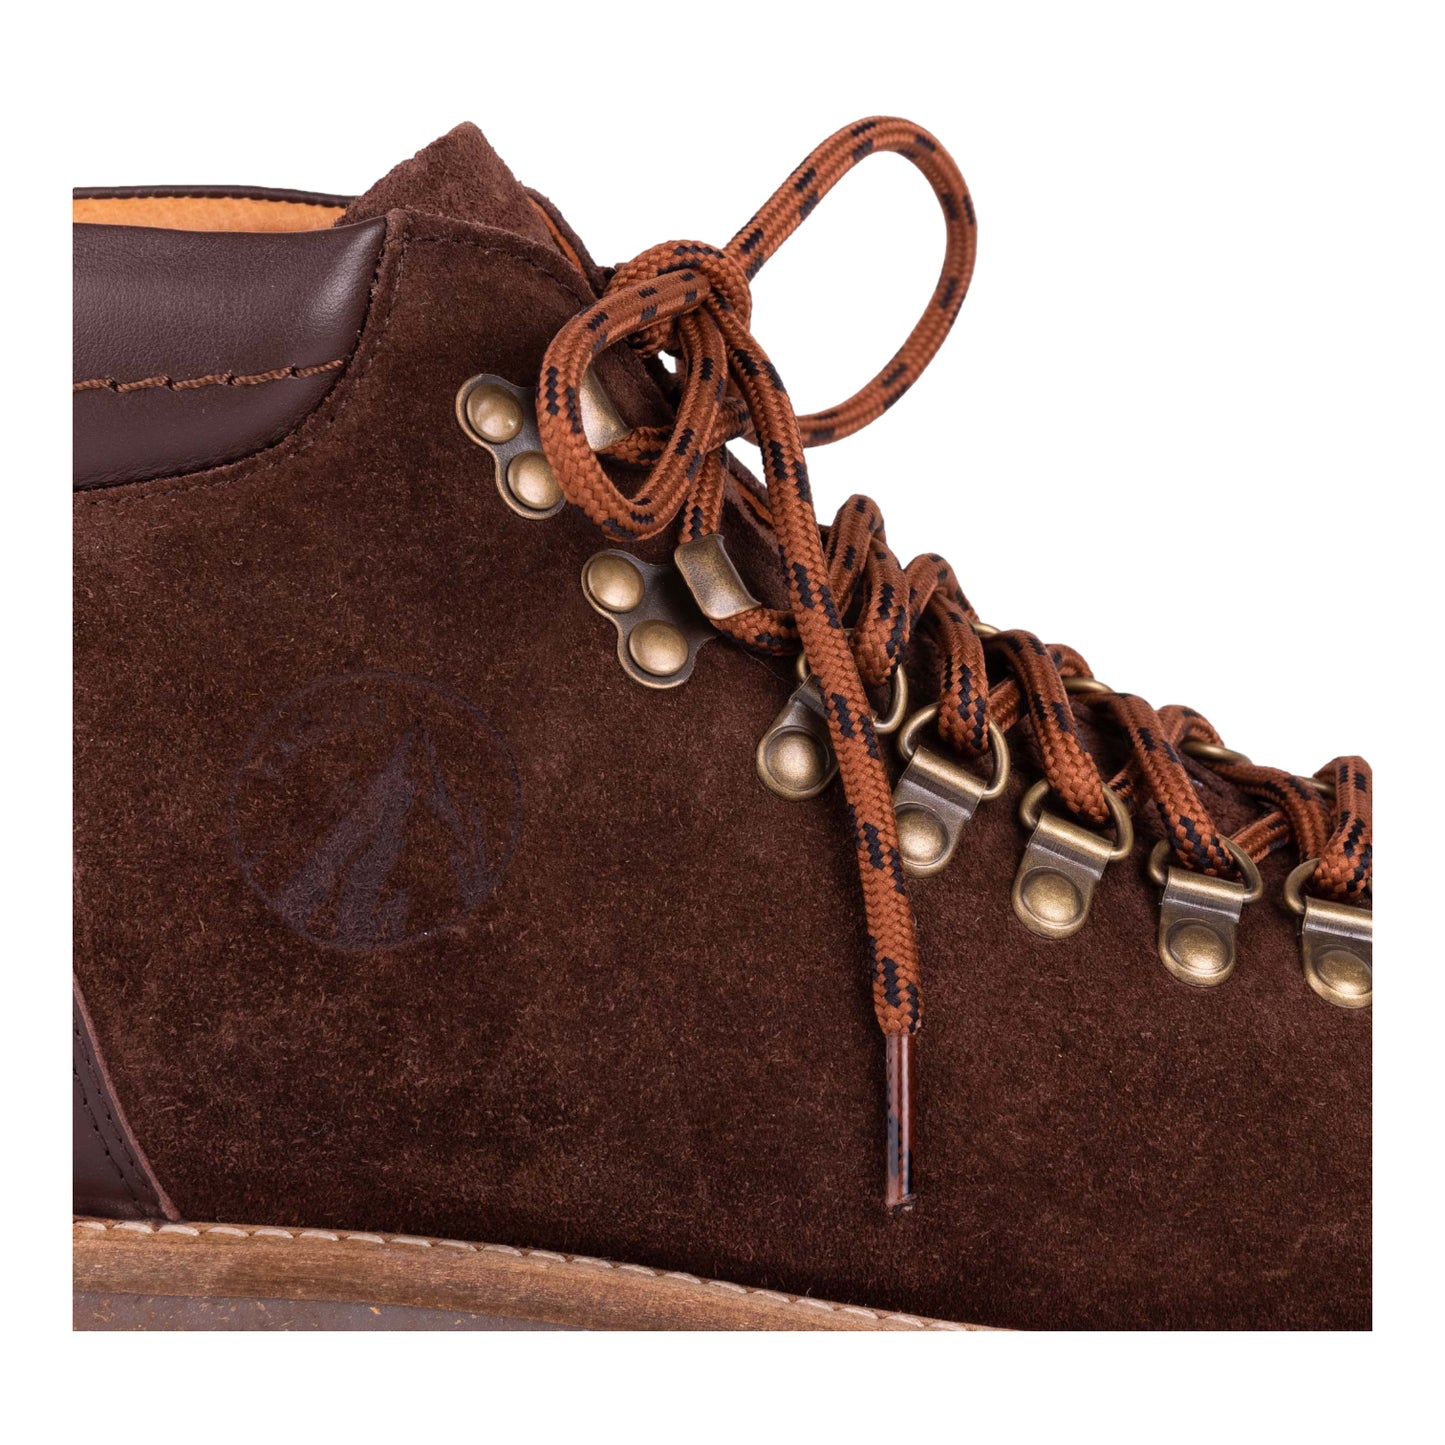 Faguo Hawthorn Boots Brown